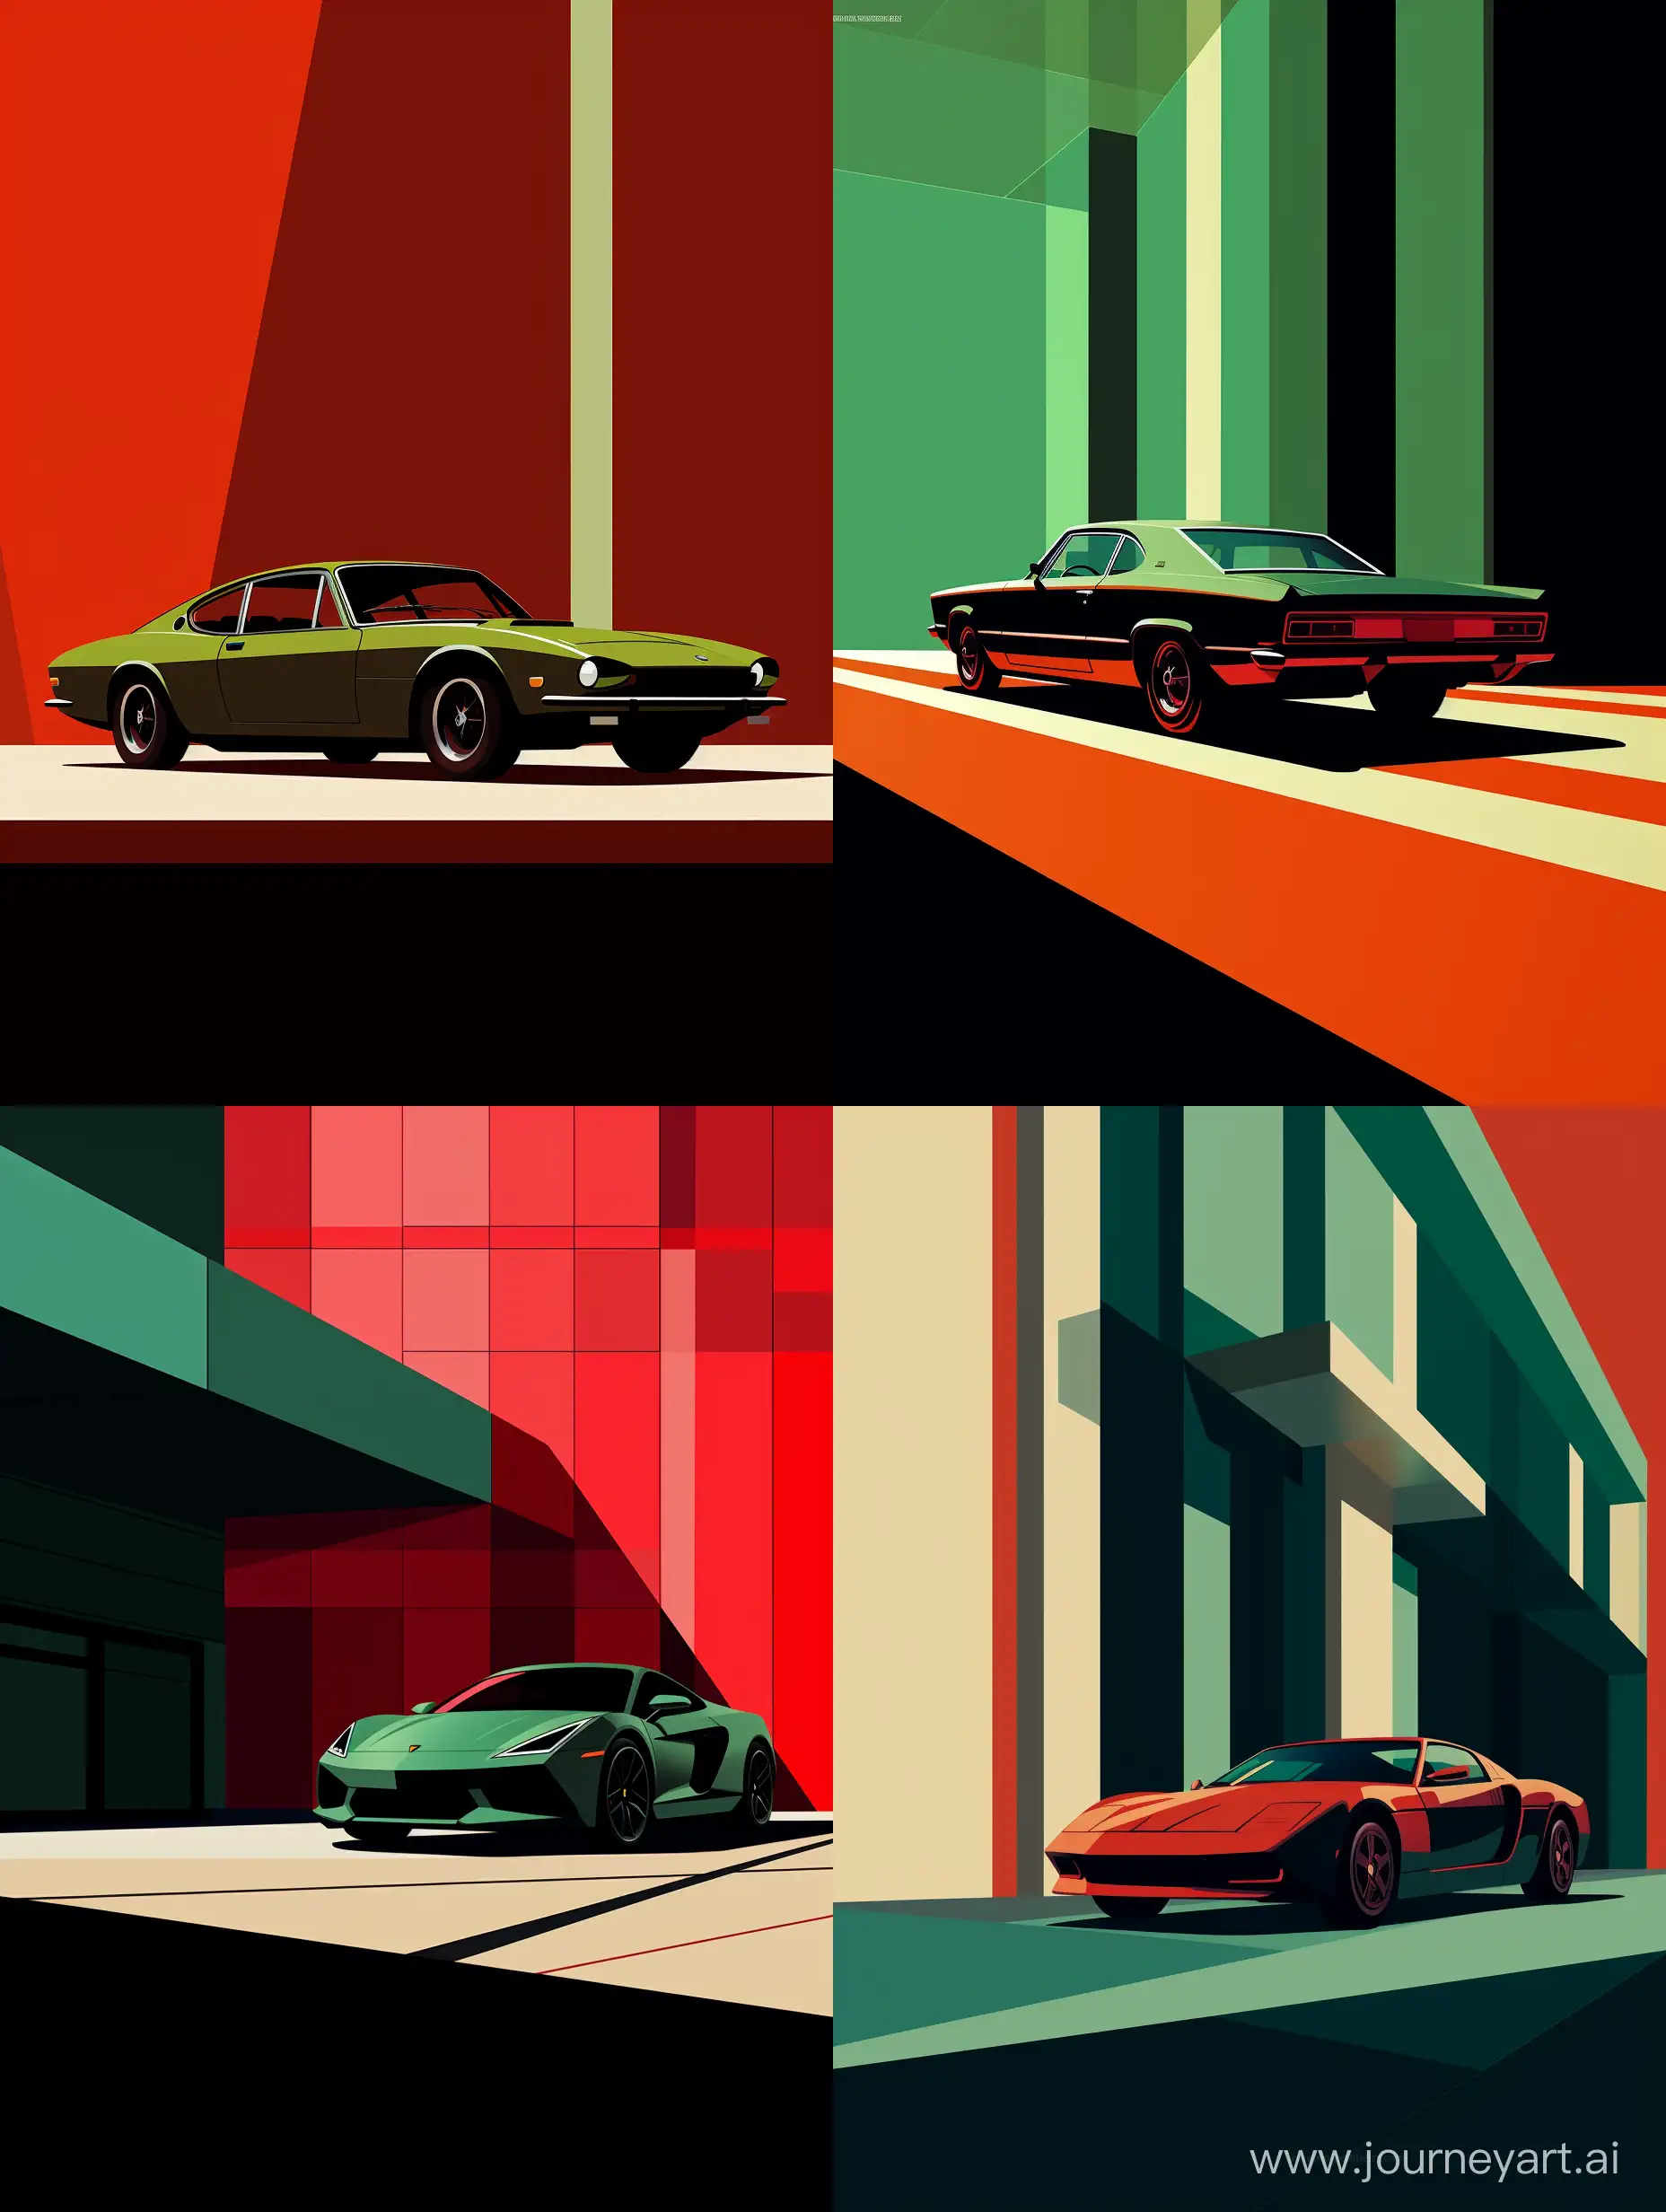 poster celebrating Italian automotive design. extremely Minimalistic design. simplicity of shapes, elegant, red green, in the style of Saul Bass, strong contrast of light and shadow, ferrari lamborghini alfaromeo 
